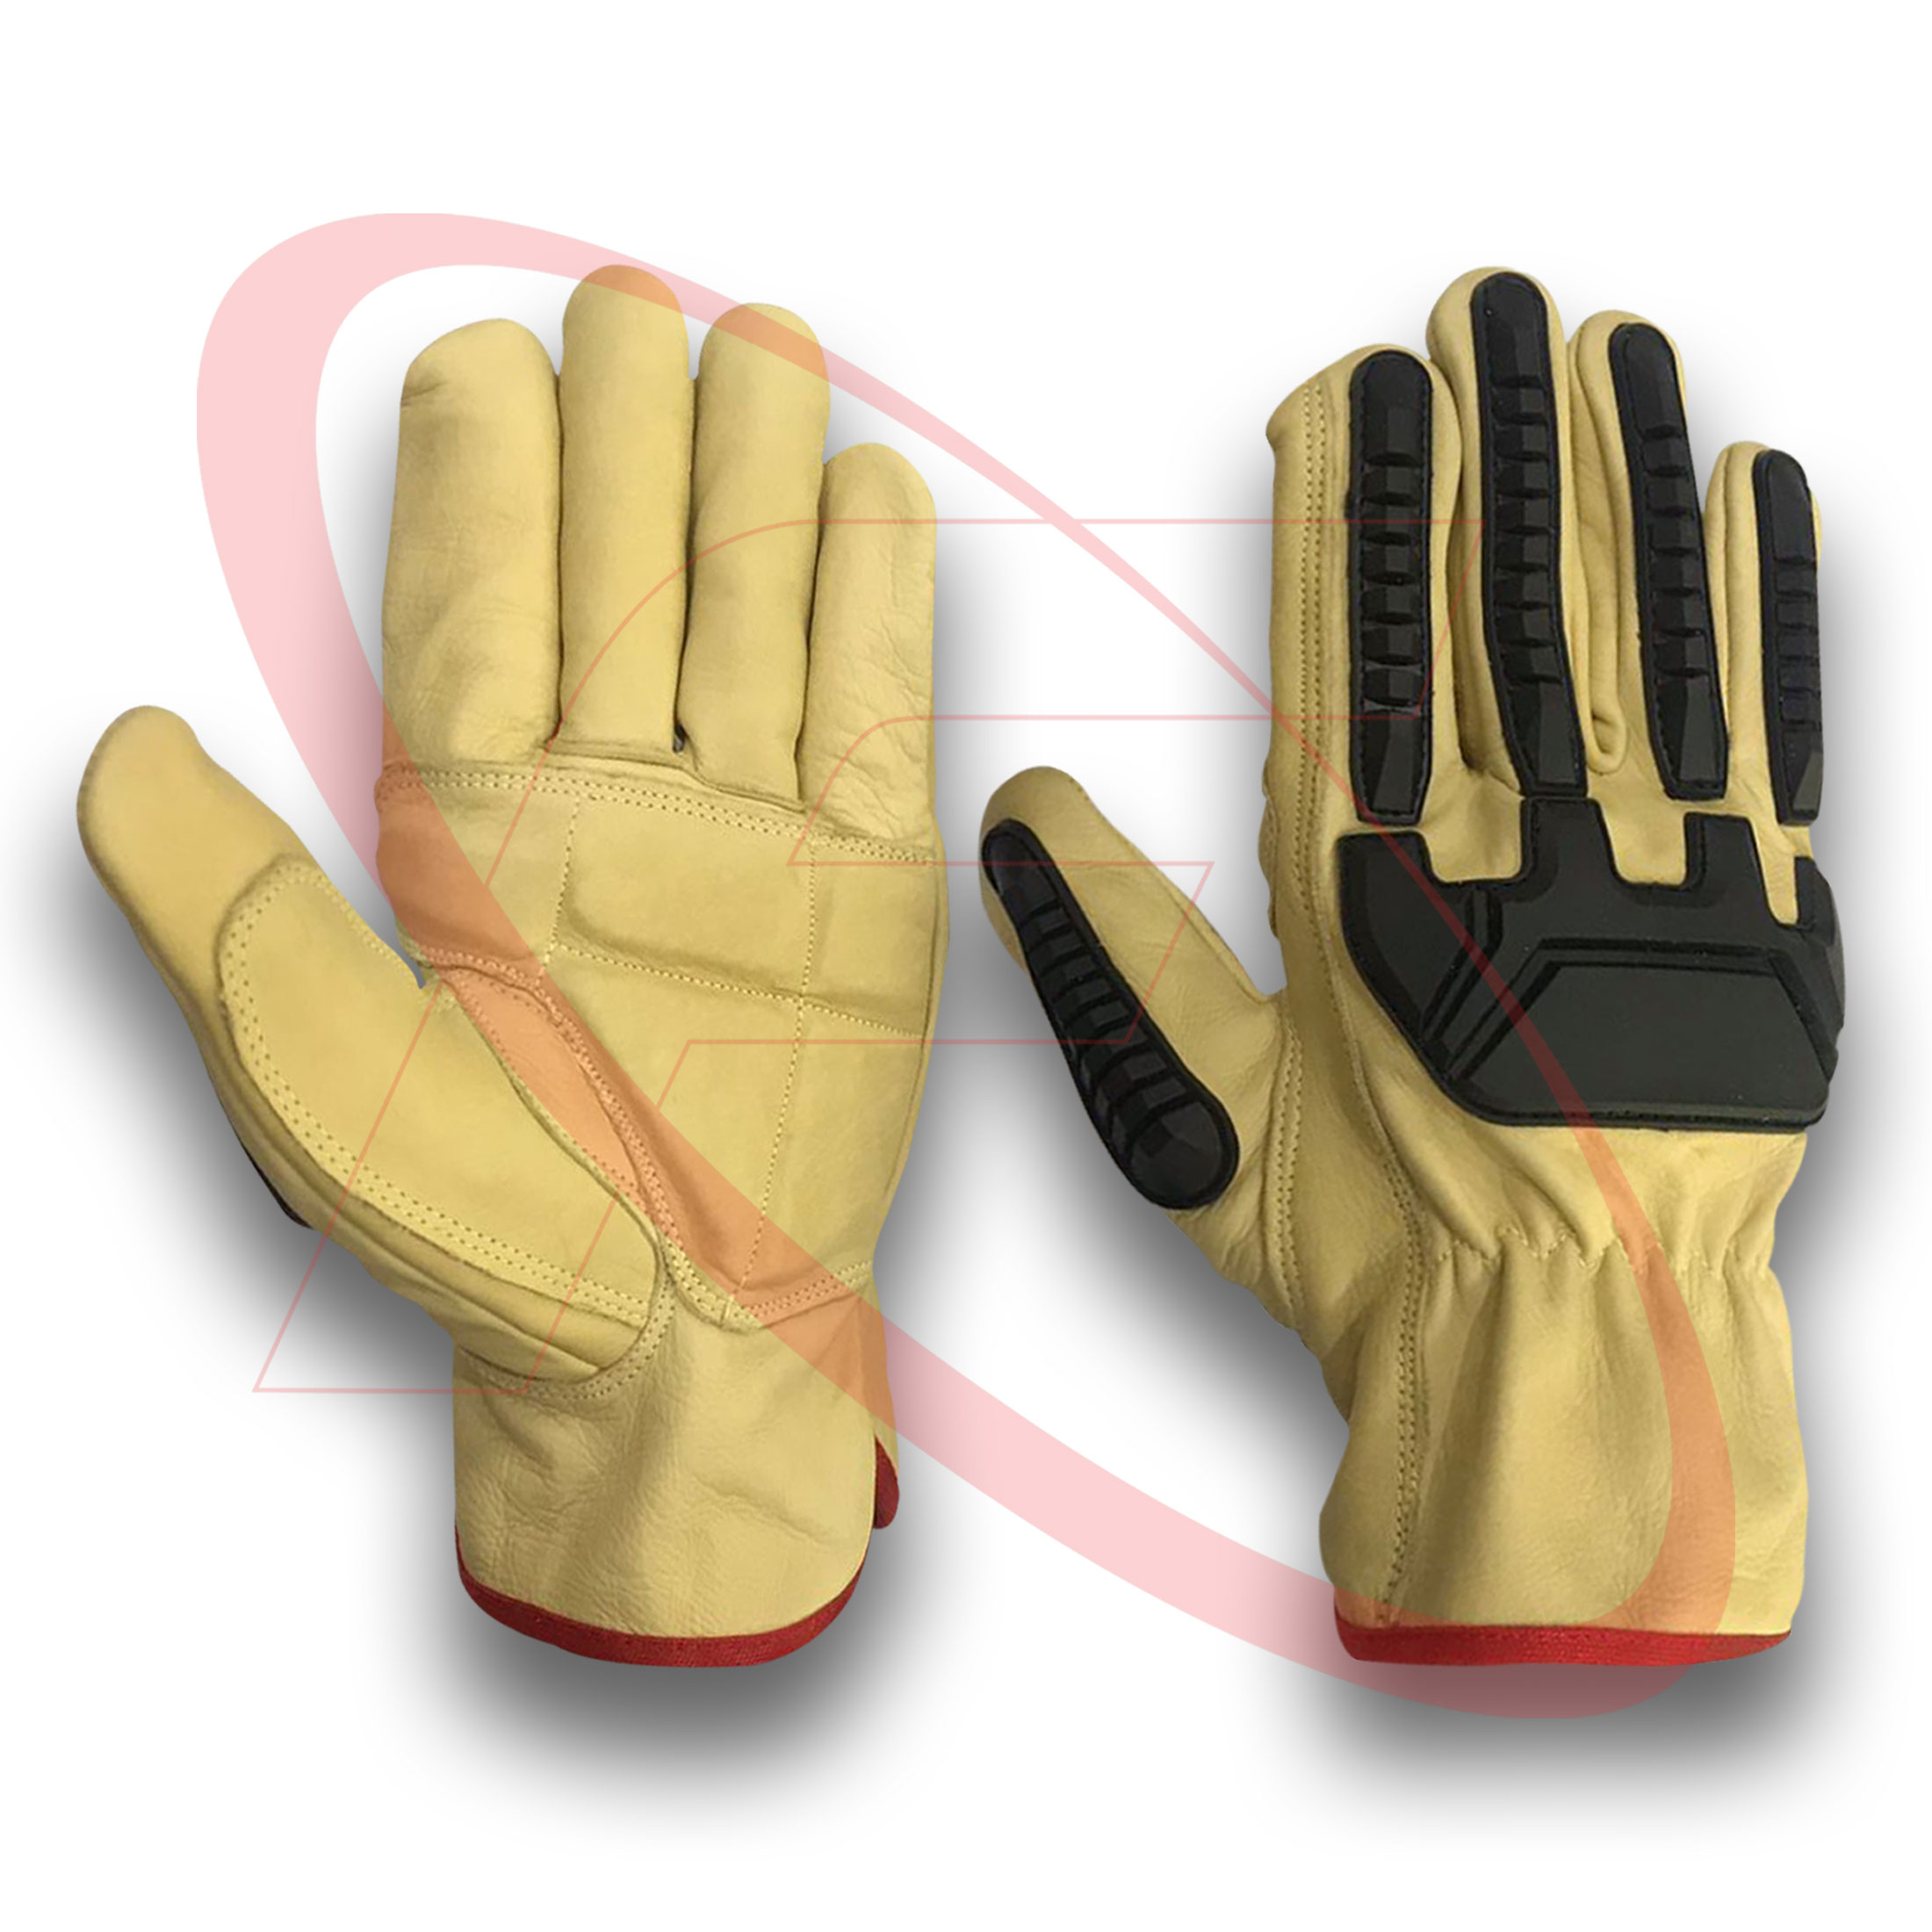 Anti Impact Cowhide Leather Safety Gloves Best Quality Impact Protective Driving Gloves Best Impact Gloves